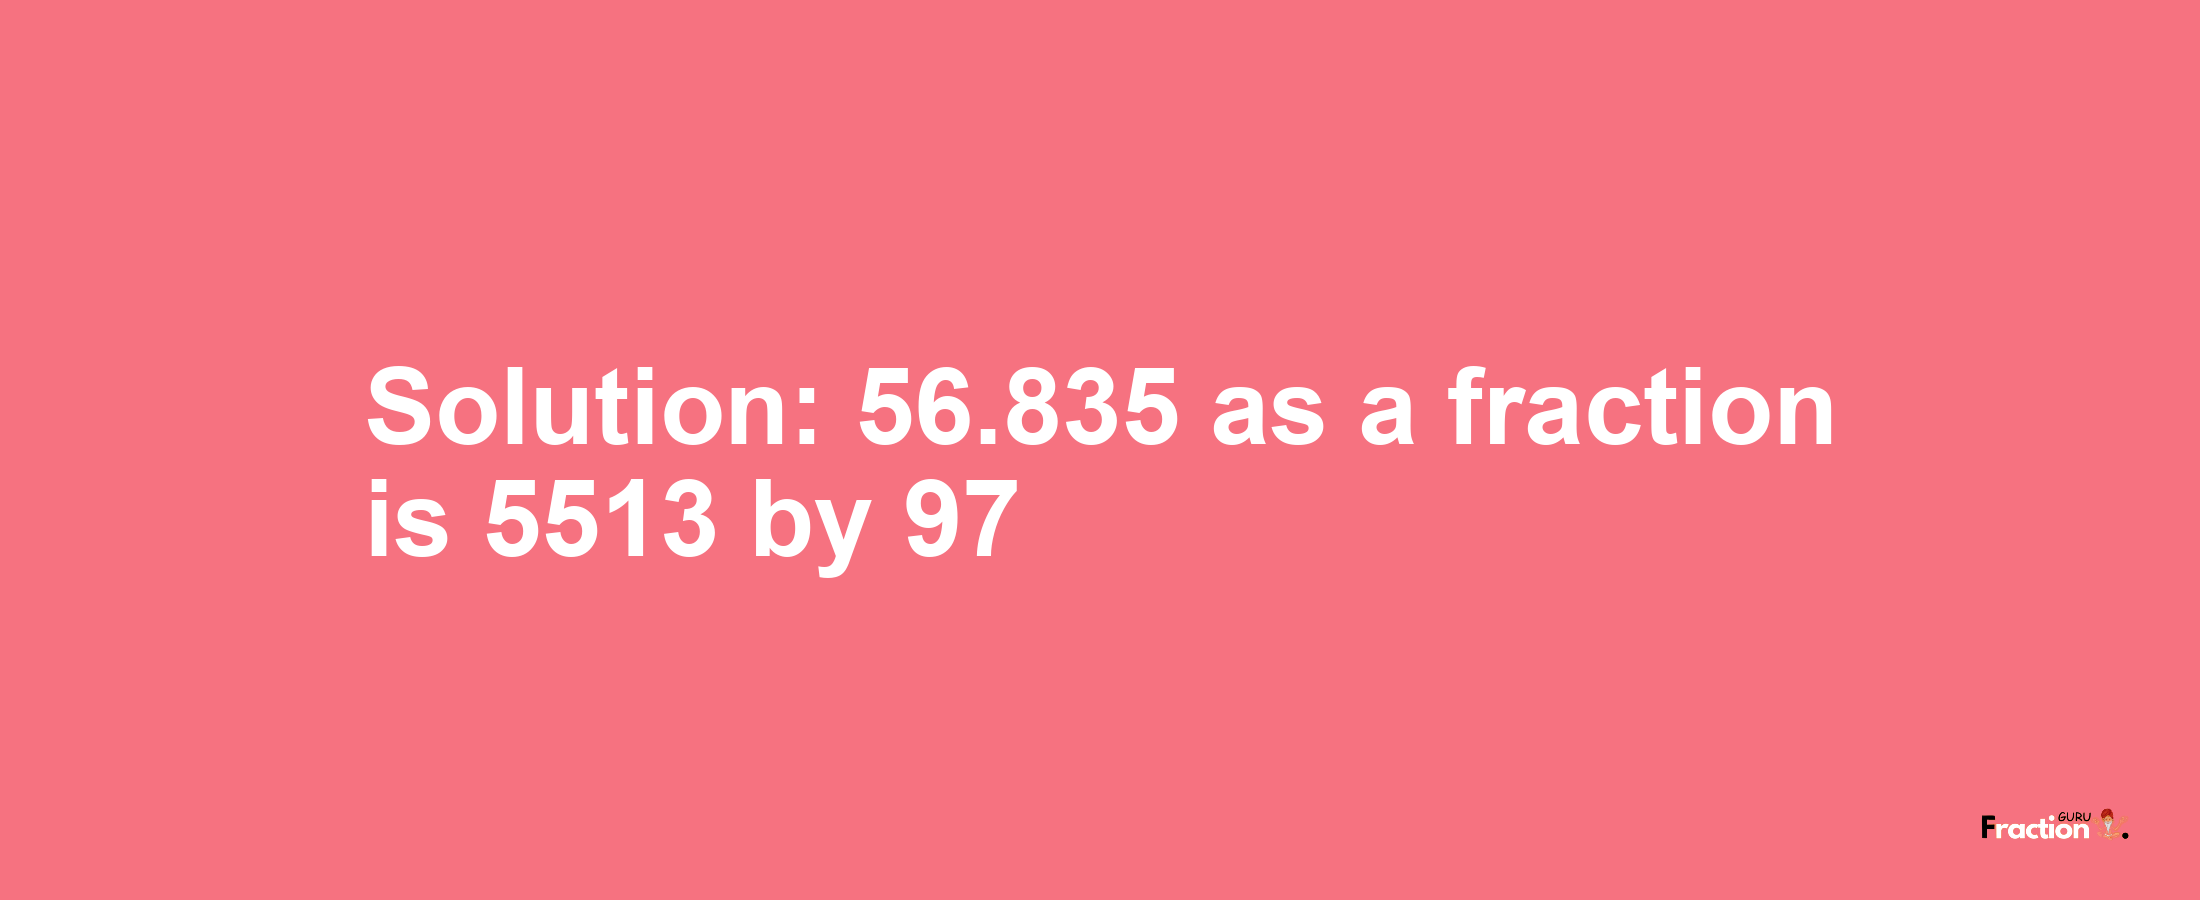 Solution:56.835 as a fraction is 5513/97